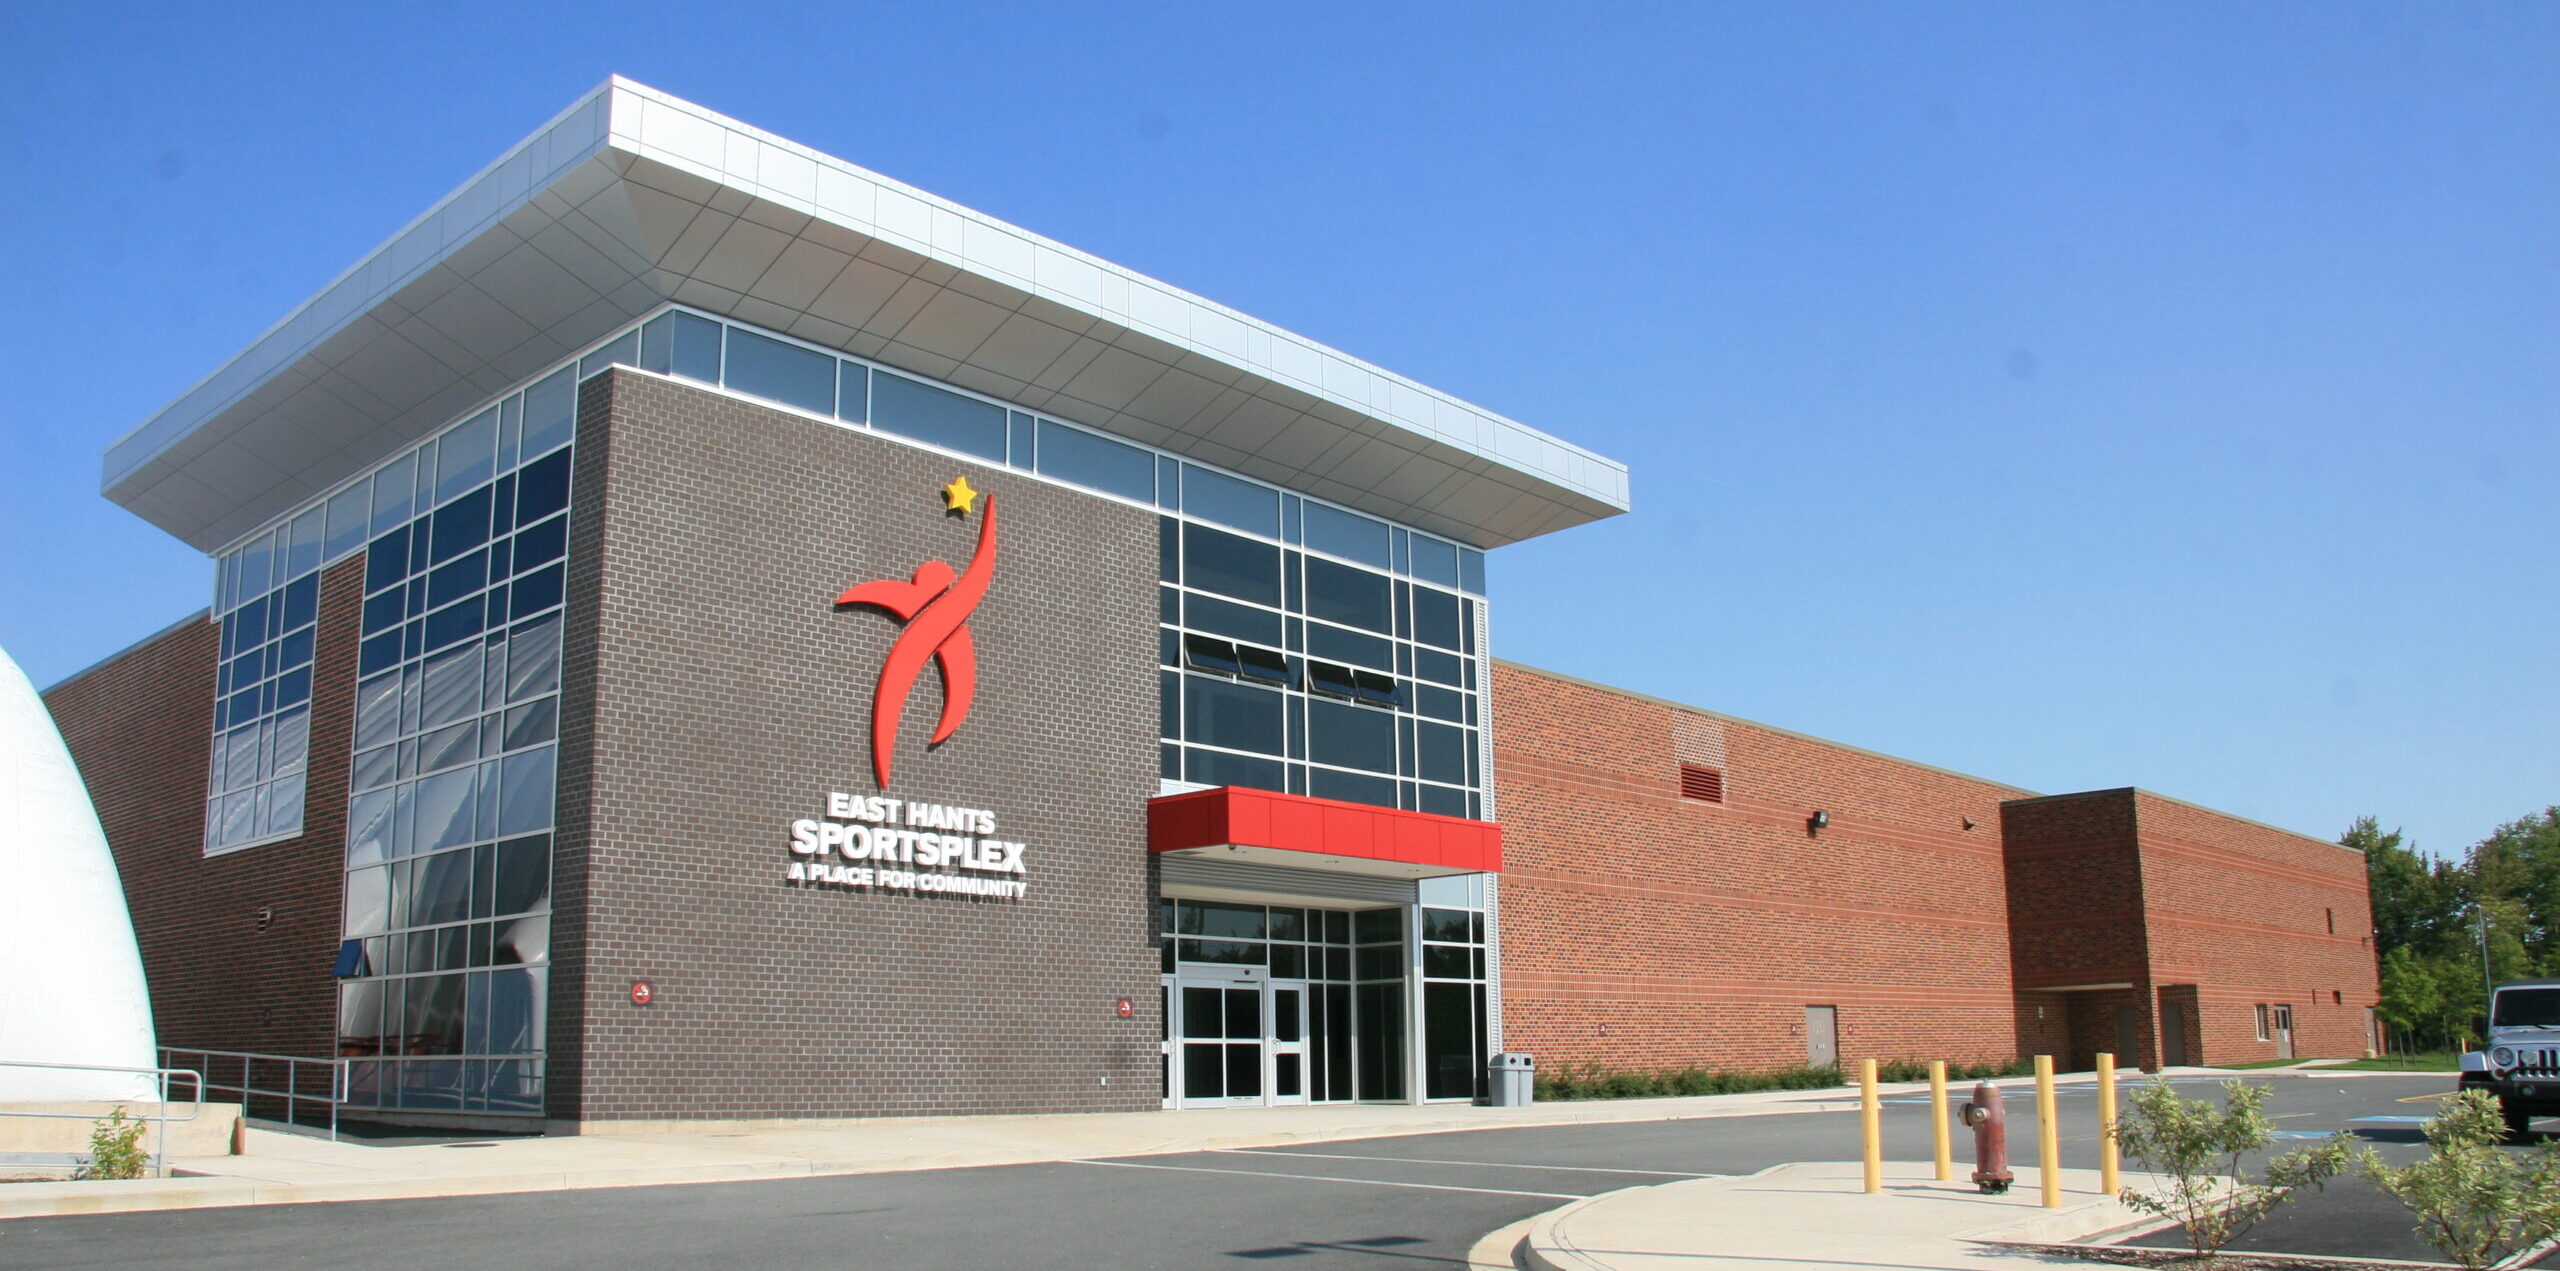 A two-storey grey brick atrium addition to an existing red brick arena.